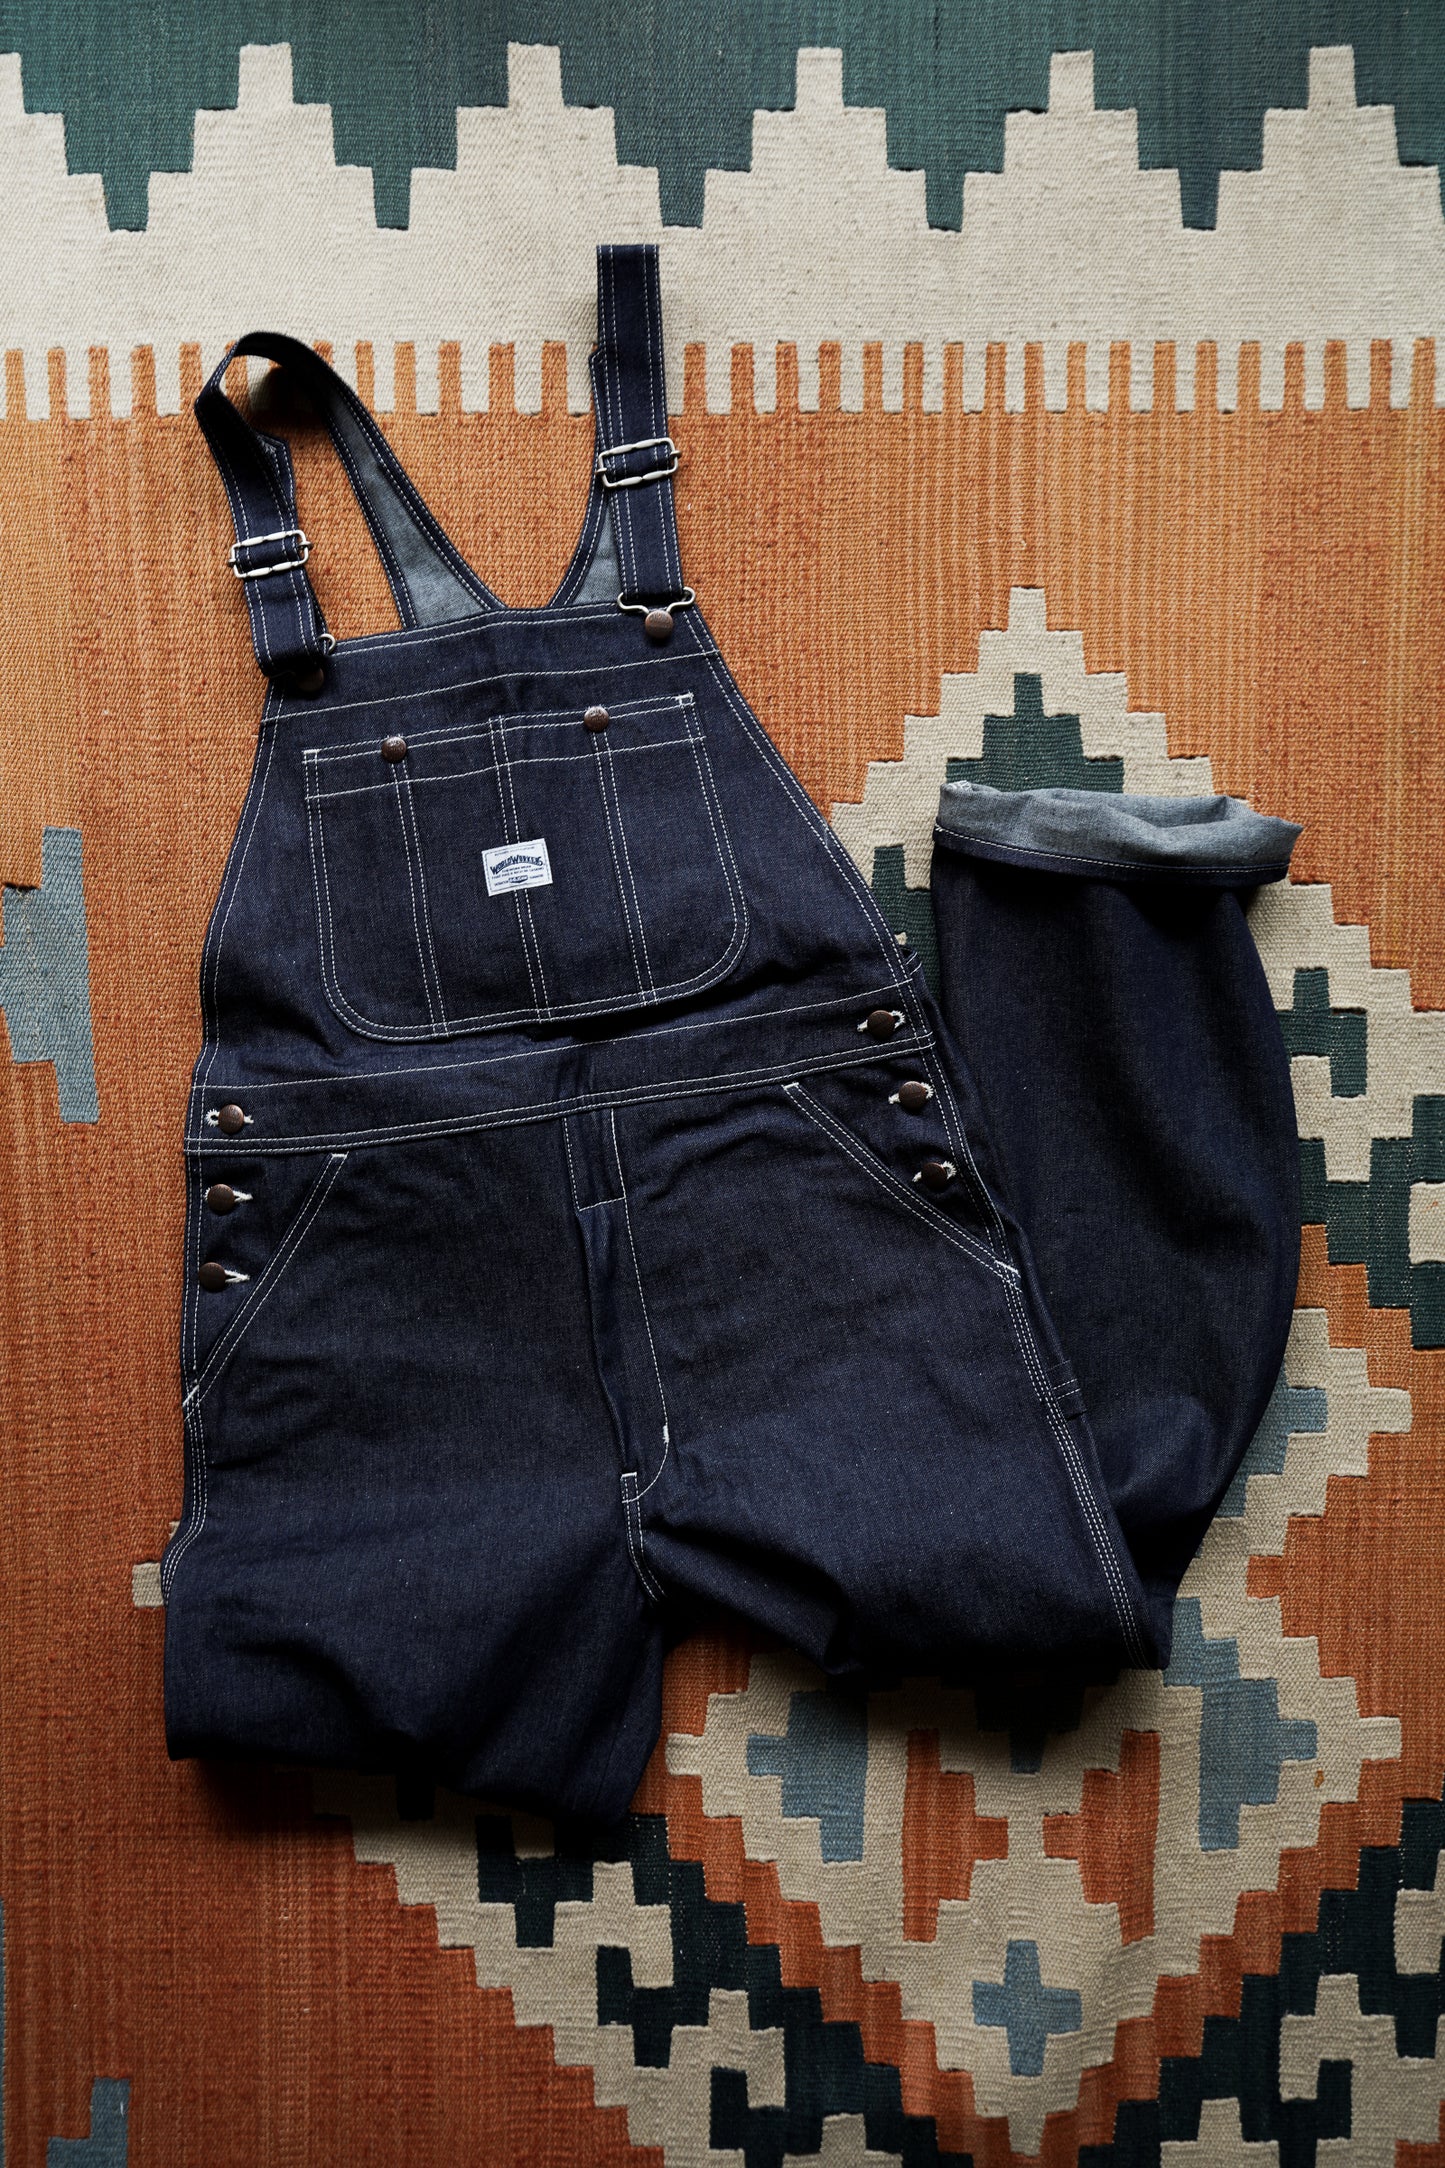 WW502K/WWK502K (000) World Workers Overall ノンウォッシュインディゴ